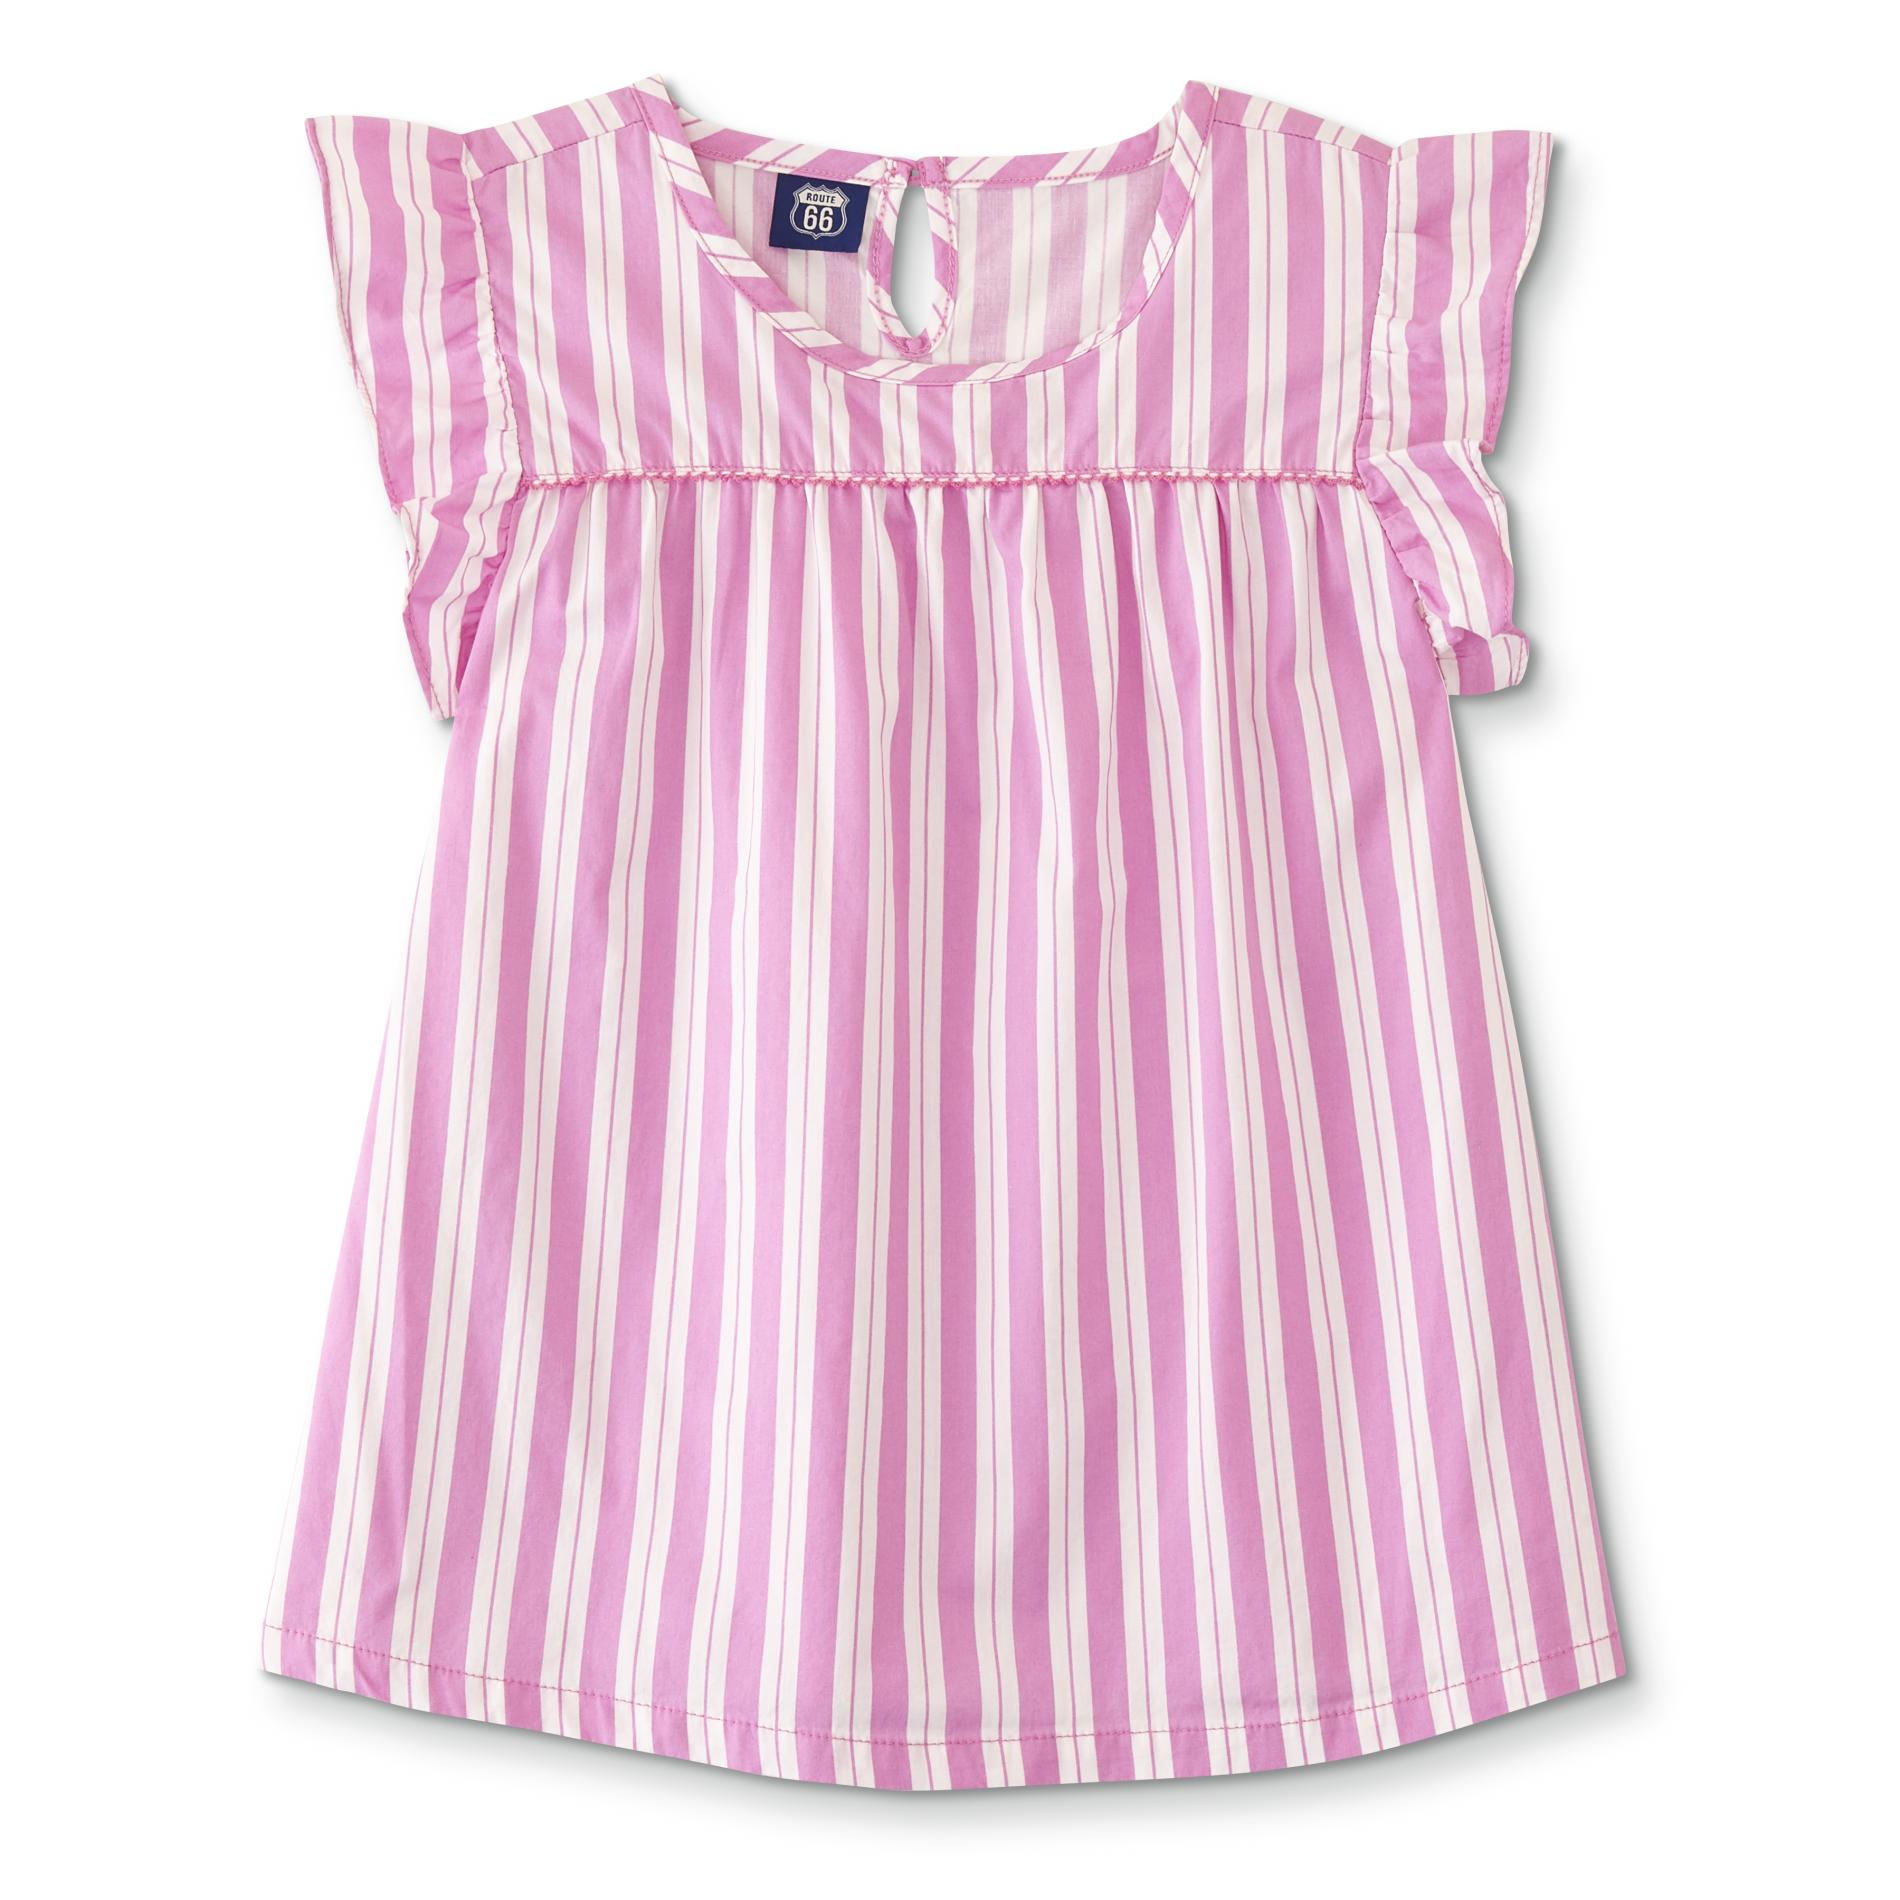 Route 66 Girls' Woven Top - Striped